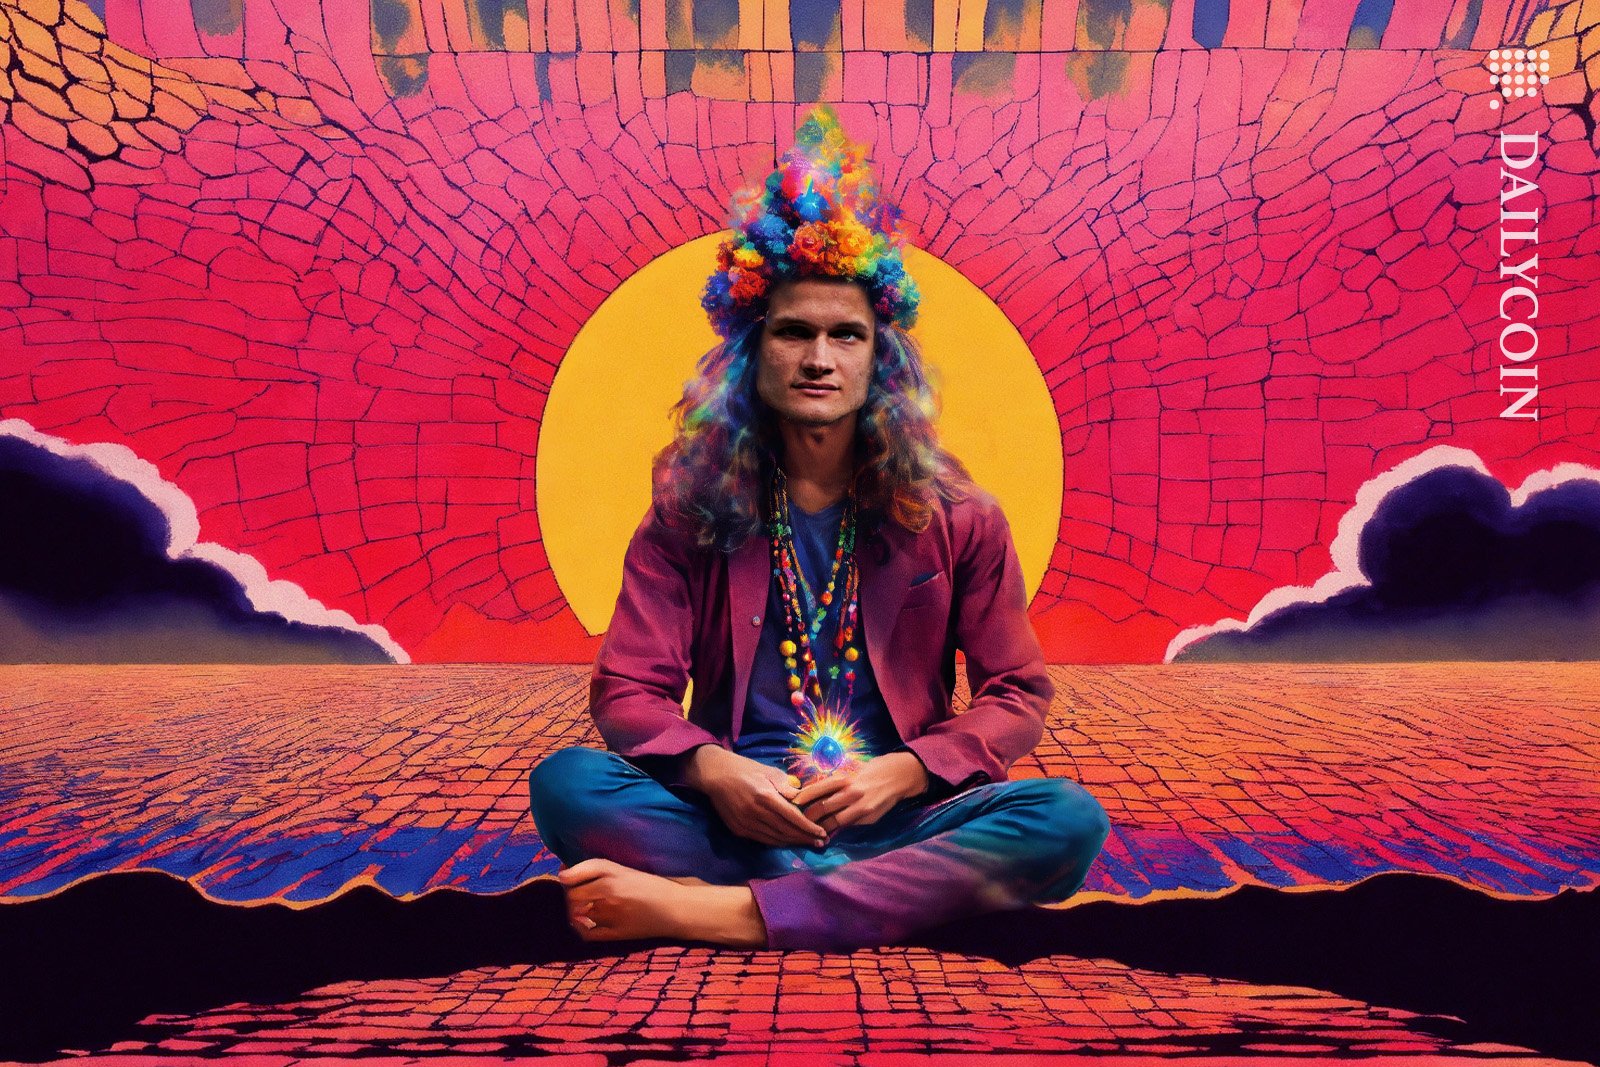 Vitalik Buterin dressed as a hippy on a trippy painting.